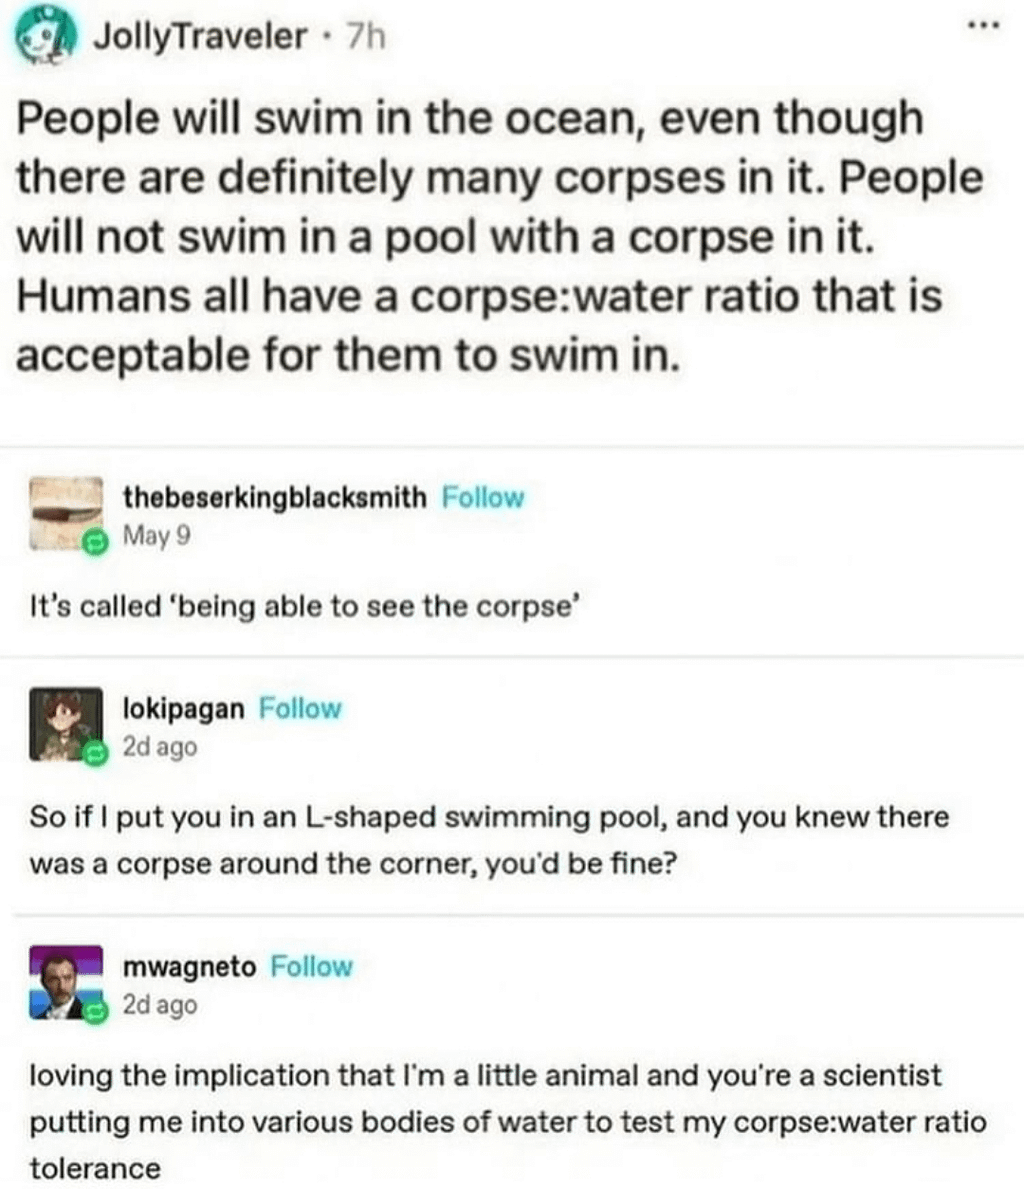 Tumblr thread. Original post says “People will swim in the ocean, even though there are definitely many corpses in it. People will not swim in a pool with a corpse in it. Humans all have a corpse:water ratio that is acceptable for them to swim in.” The thread continues the discussion, until a different user writes “loving the implication that I’m a little animal and you’re a scientist putting me into various bodies of water to test my corpse:water ratio tolerance”